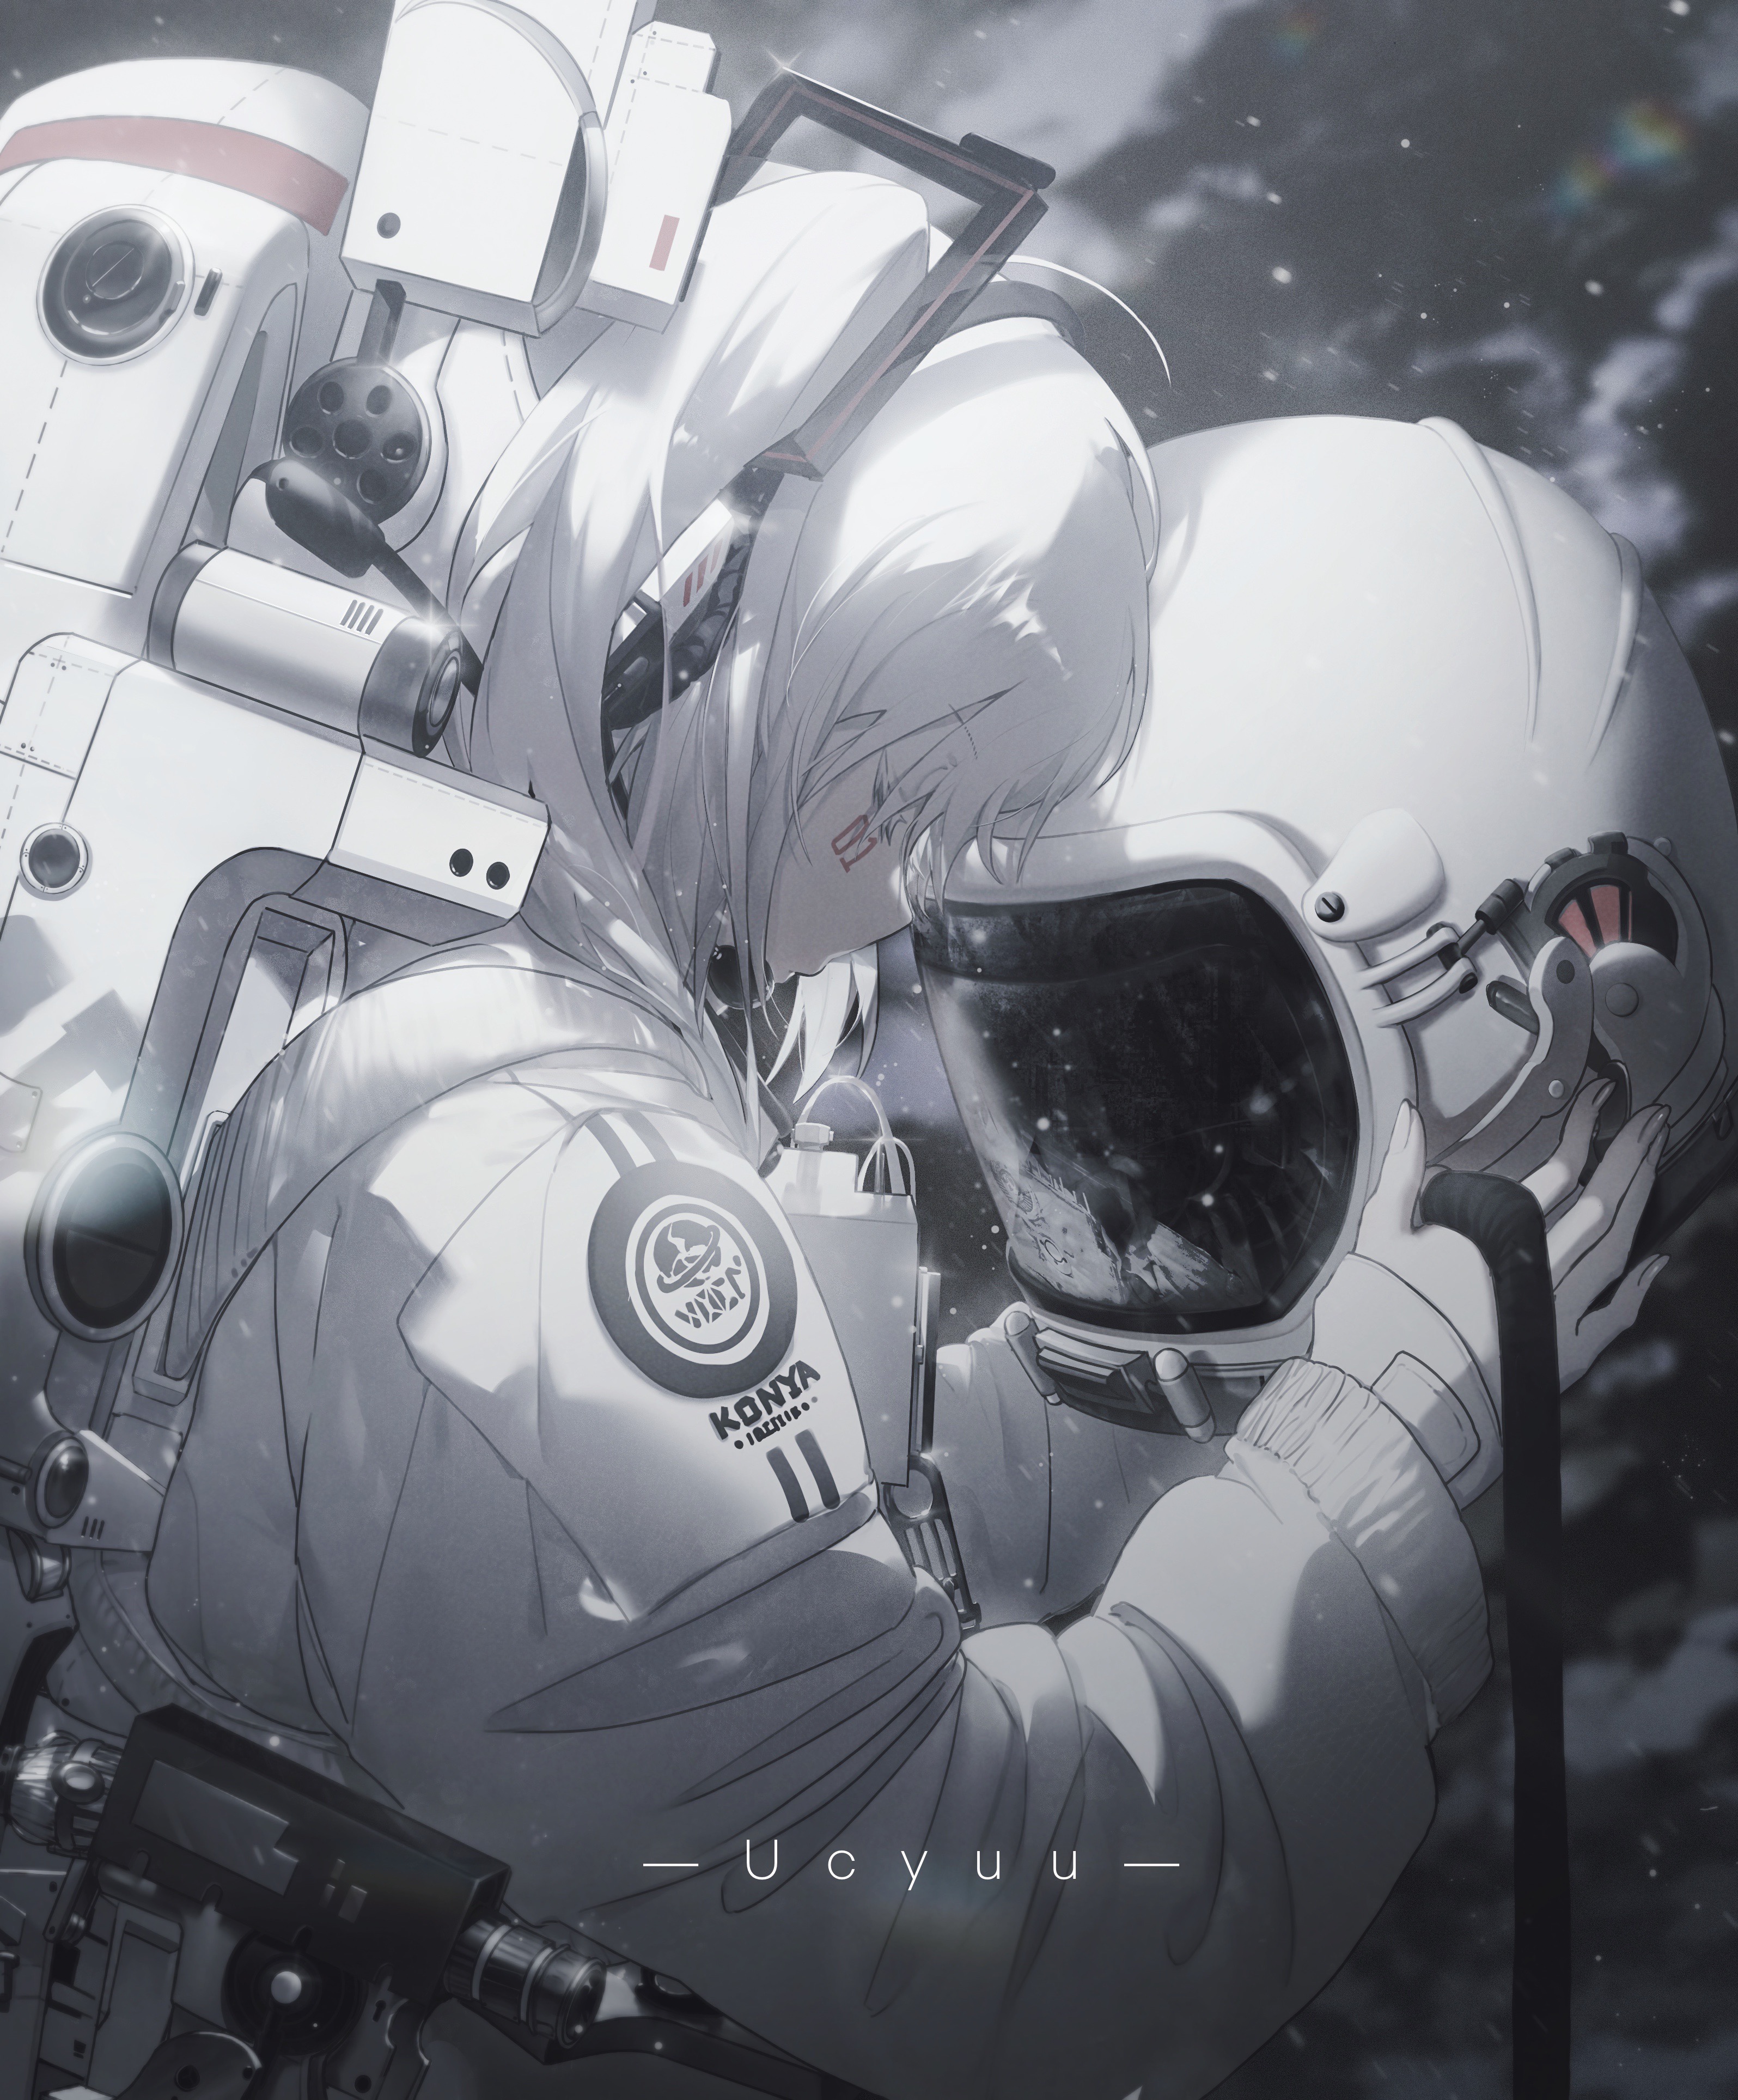 Pin by Demian on Wallpapers | Space girl art, Space anime, Astronaut art